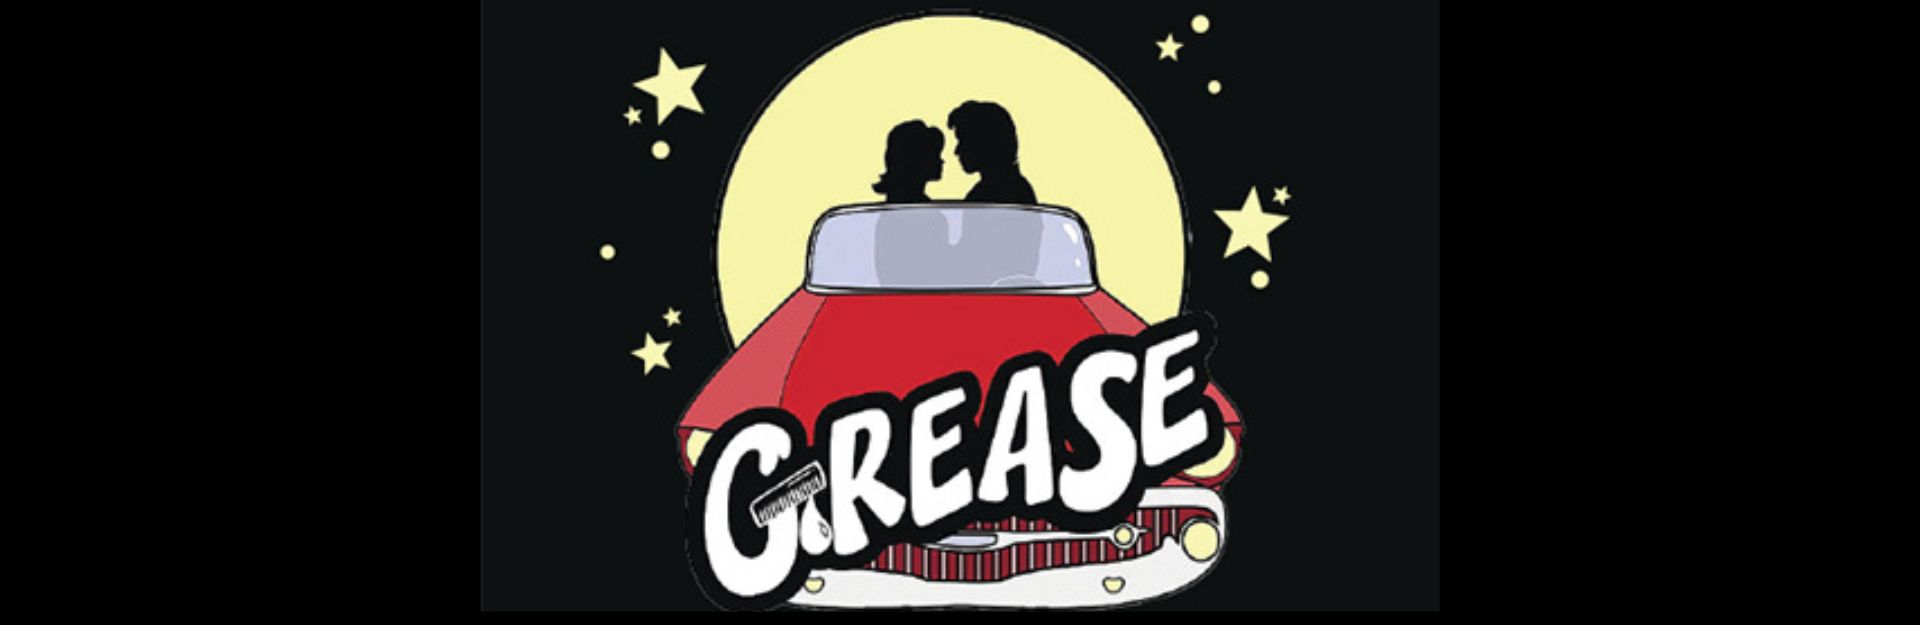 Grease Movie Night at the Marquee